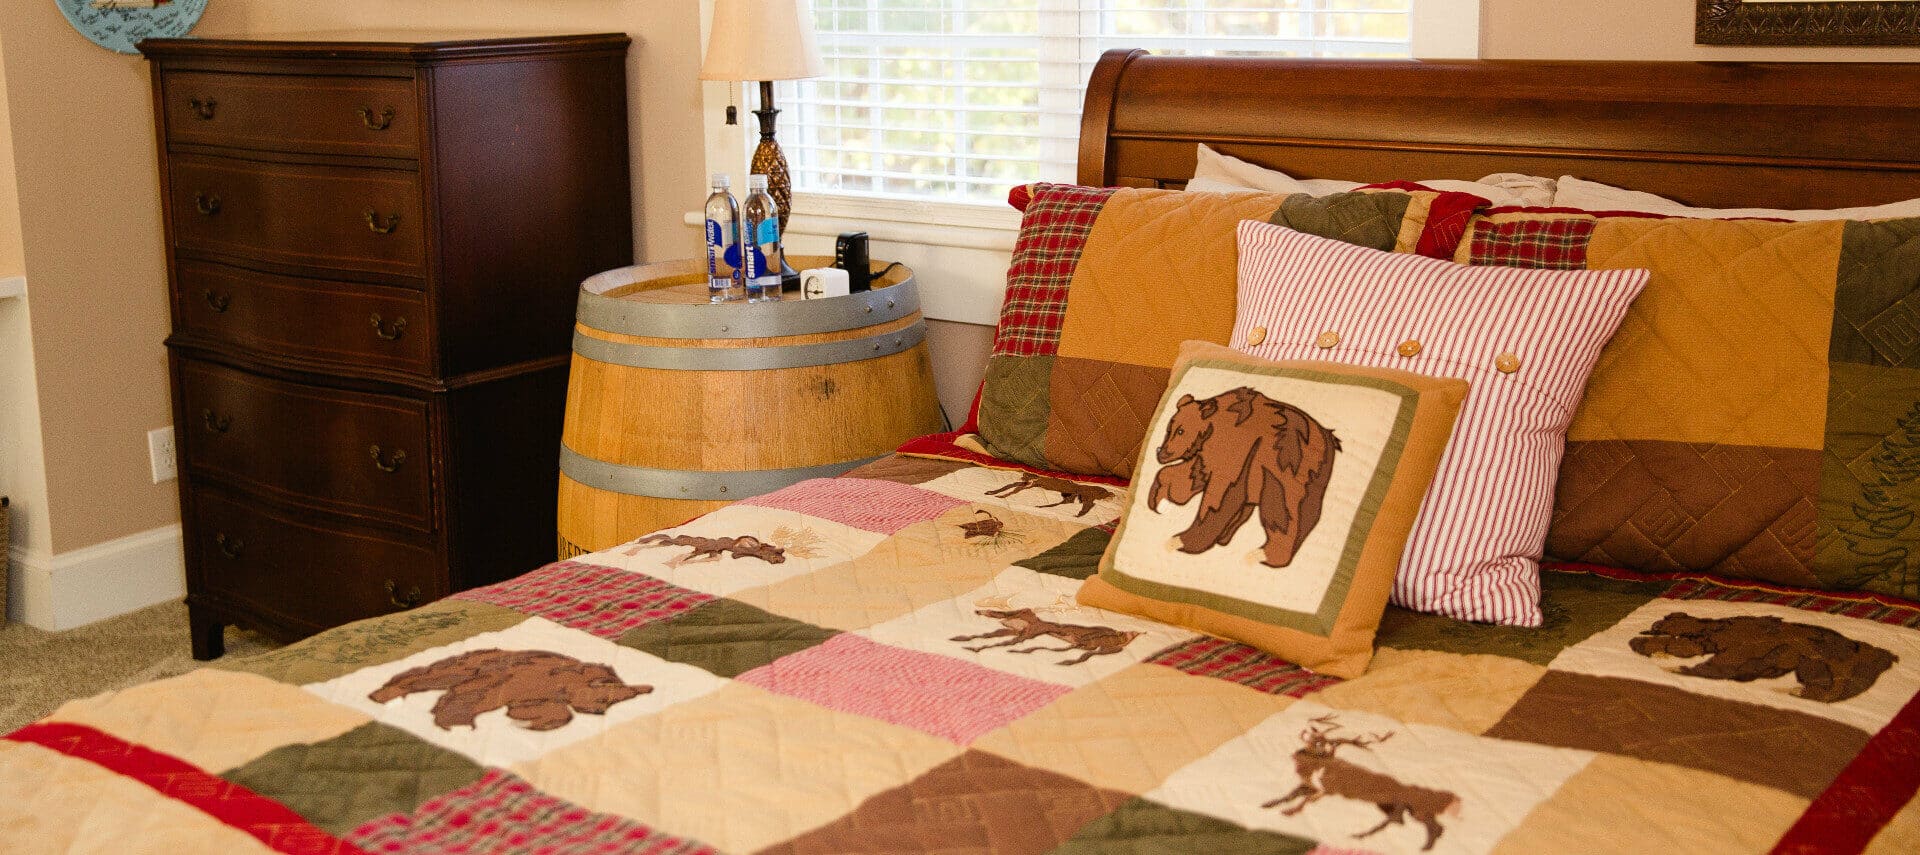 Cherry sleigh bed by window with a forest animals quilt in tan and red with a Robert Mondavi wine barrel as a nightstand, high cherry dresser in corner.